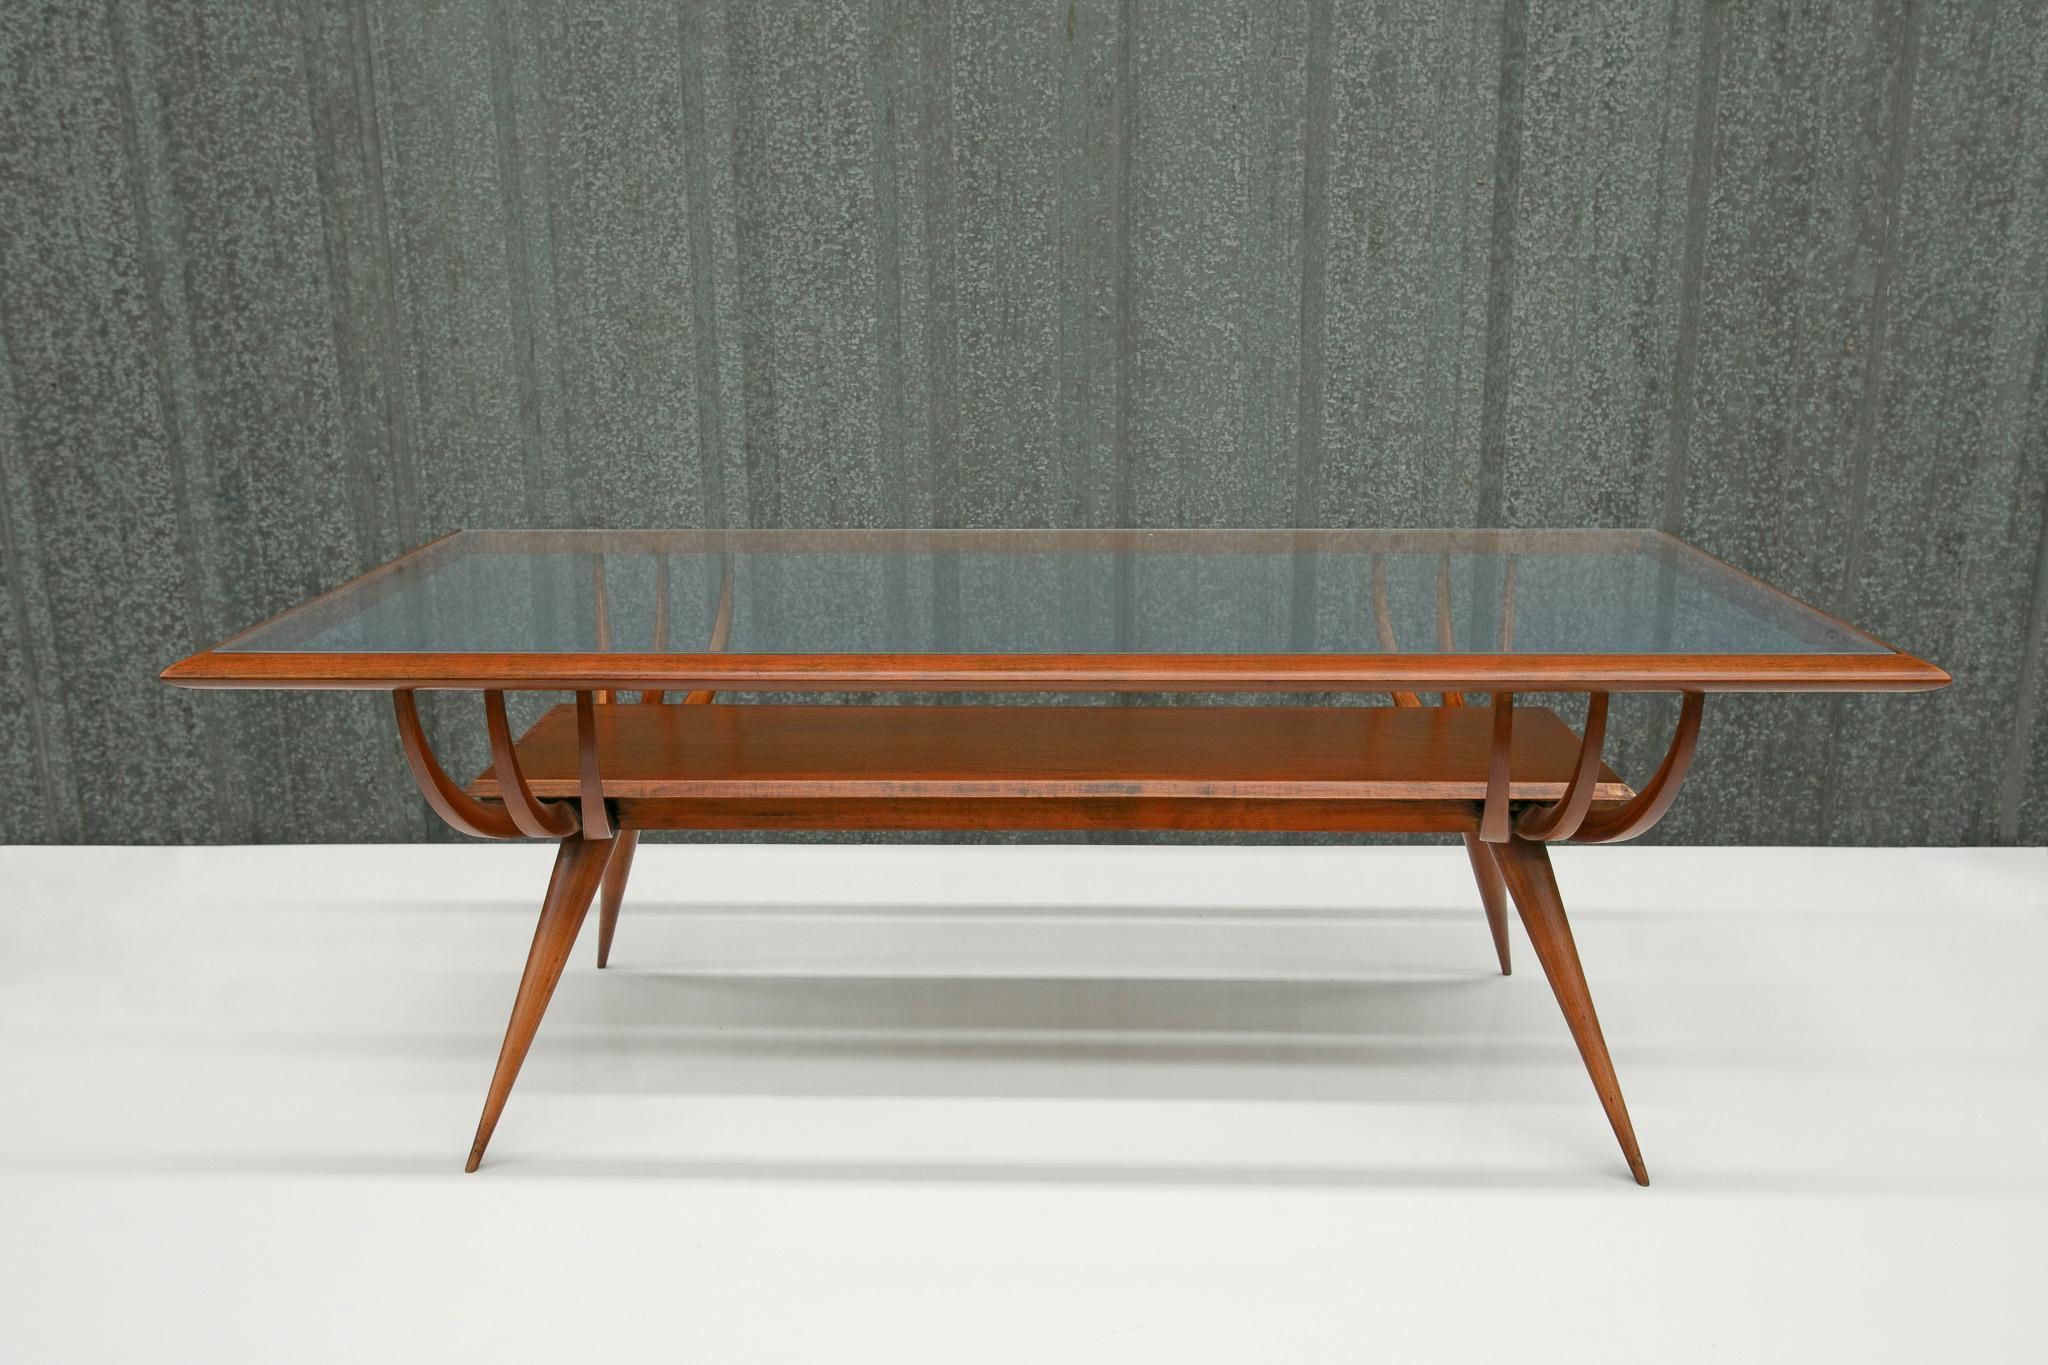 Available today, this Brazilian Modern coffee table in hardwood and glass by Giuseppe Scapinelli, 1950s, Brazil is nothing less than spectacular.

The coffee table is entirely made in Caviuna hardwood, and features four toothpick legs, a middle